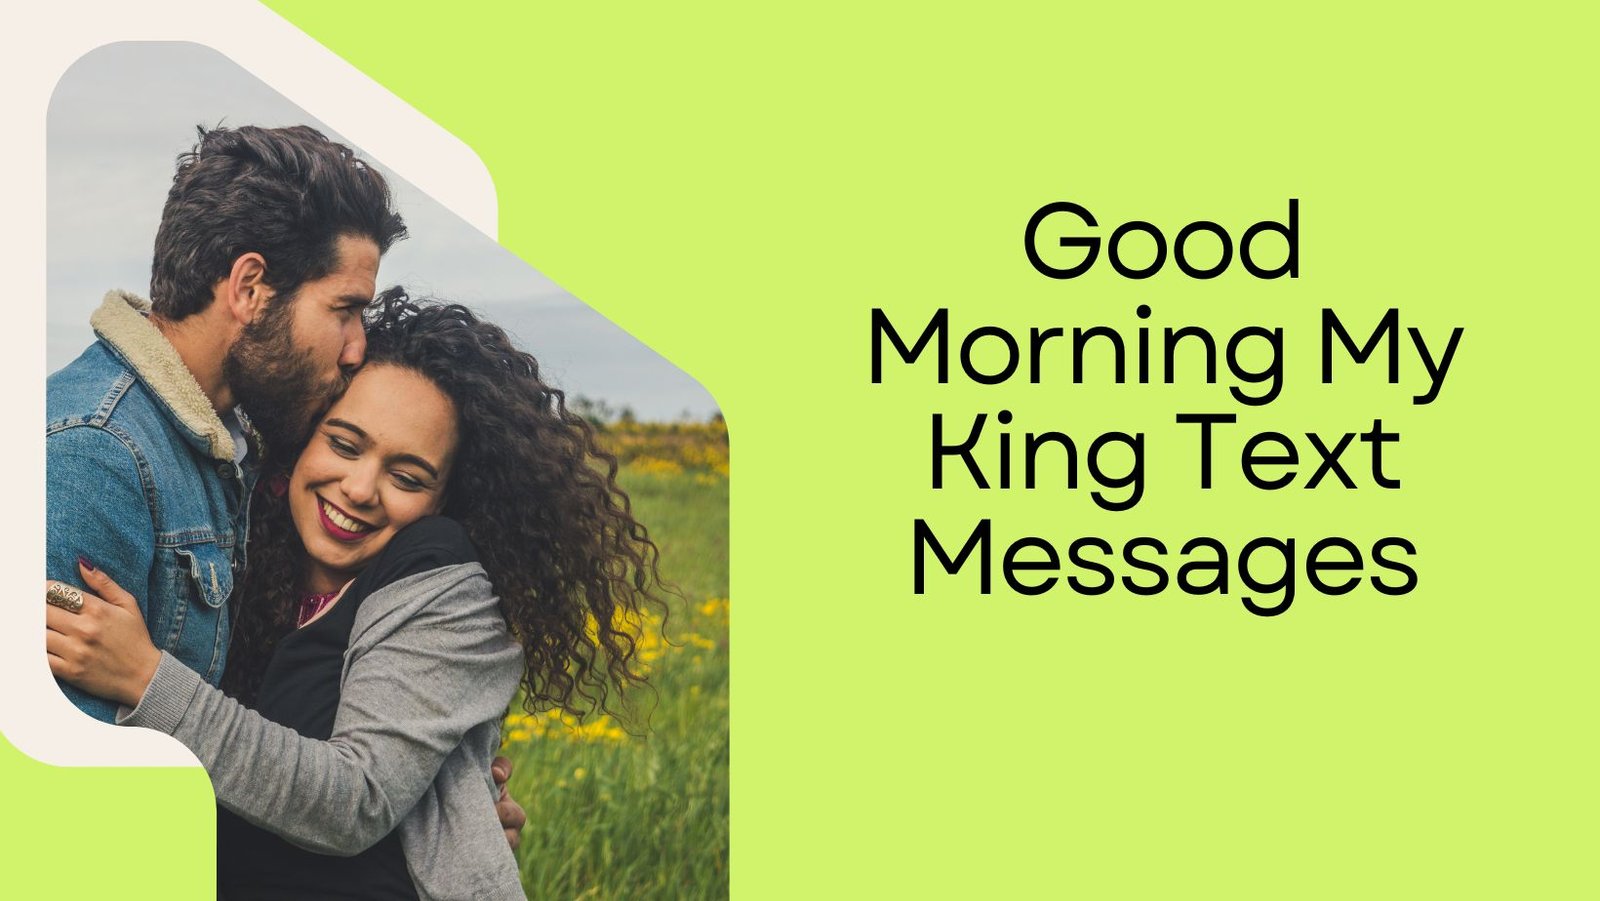 Good Morning My King Text Messages